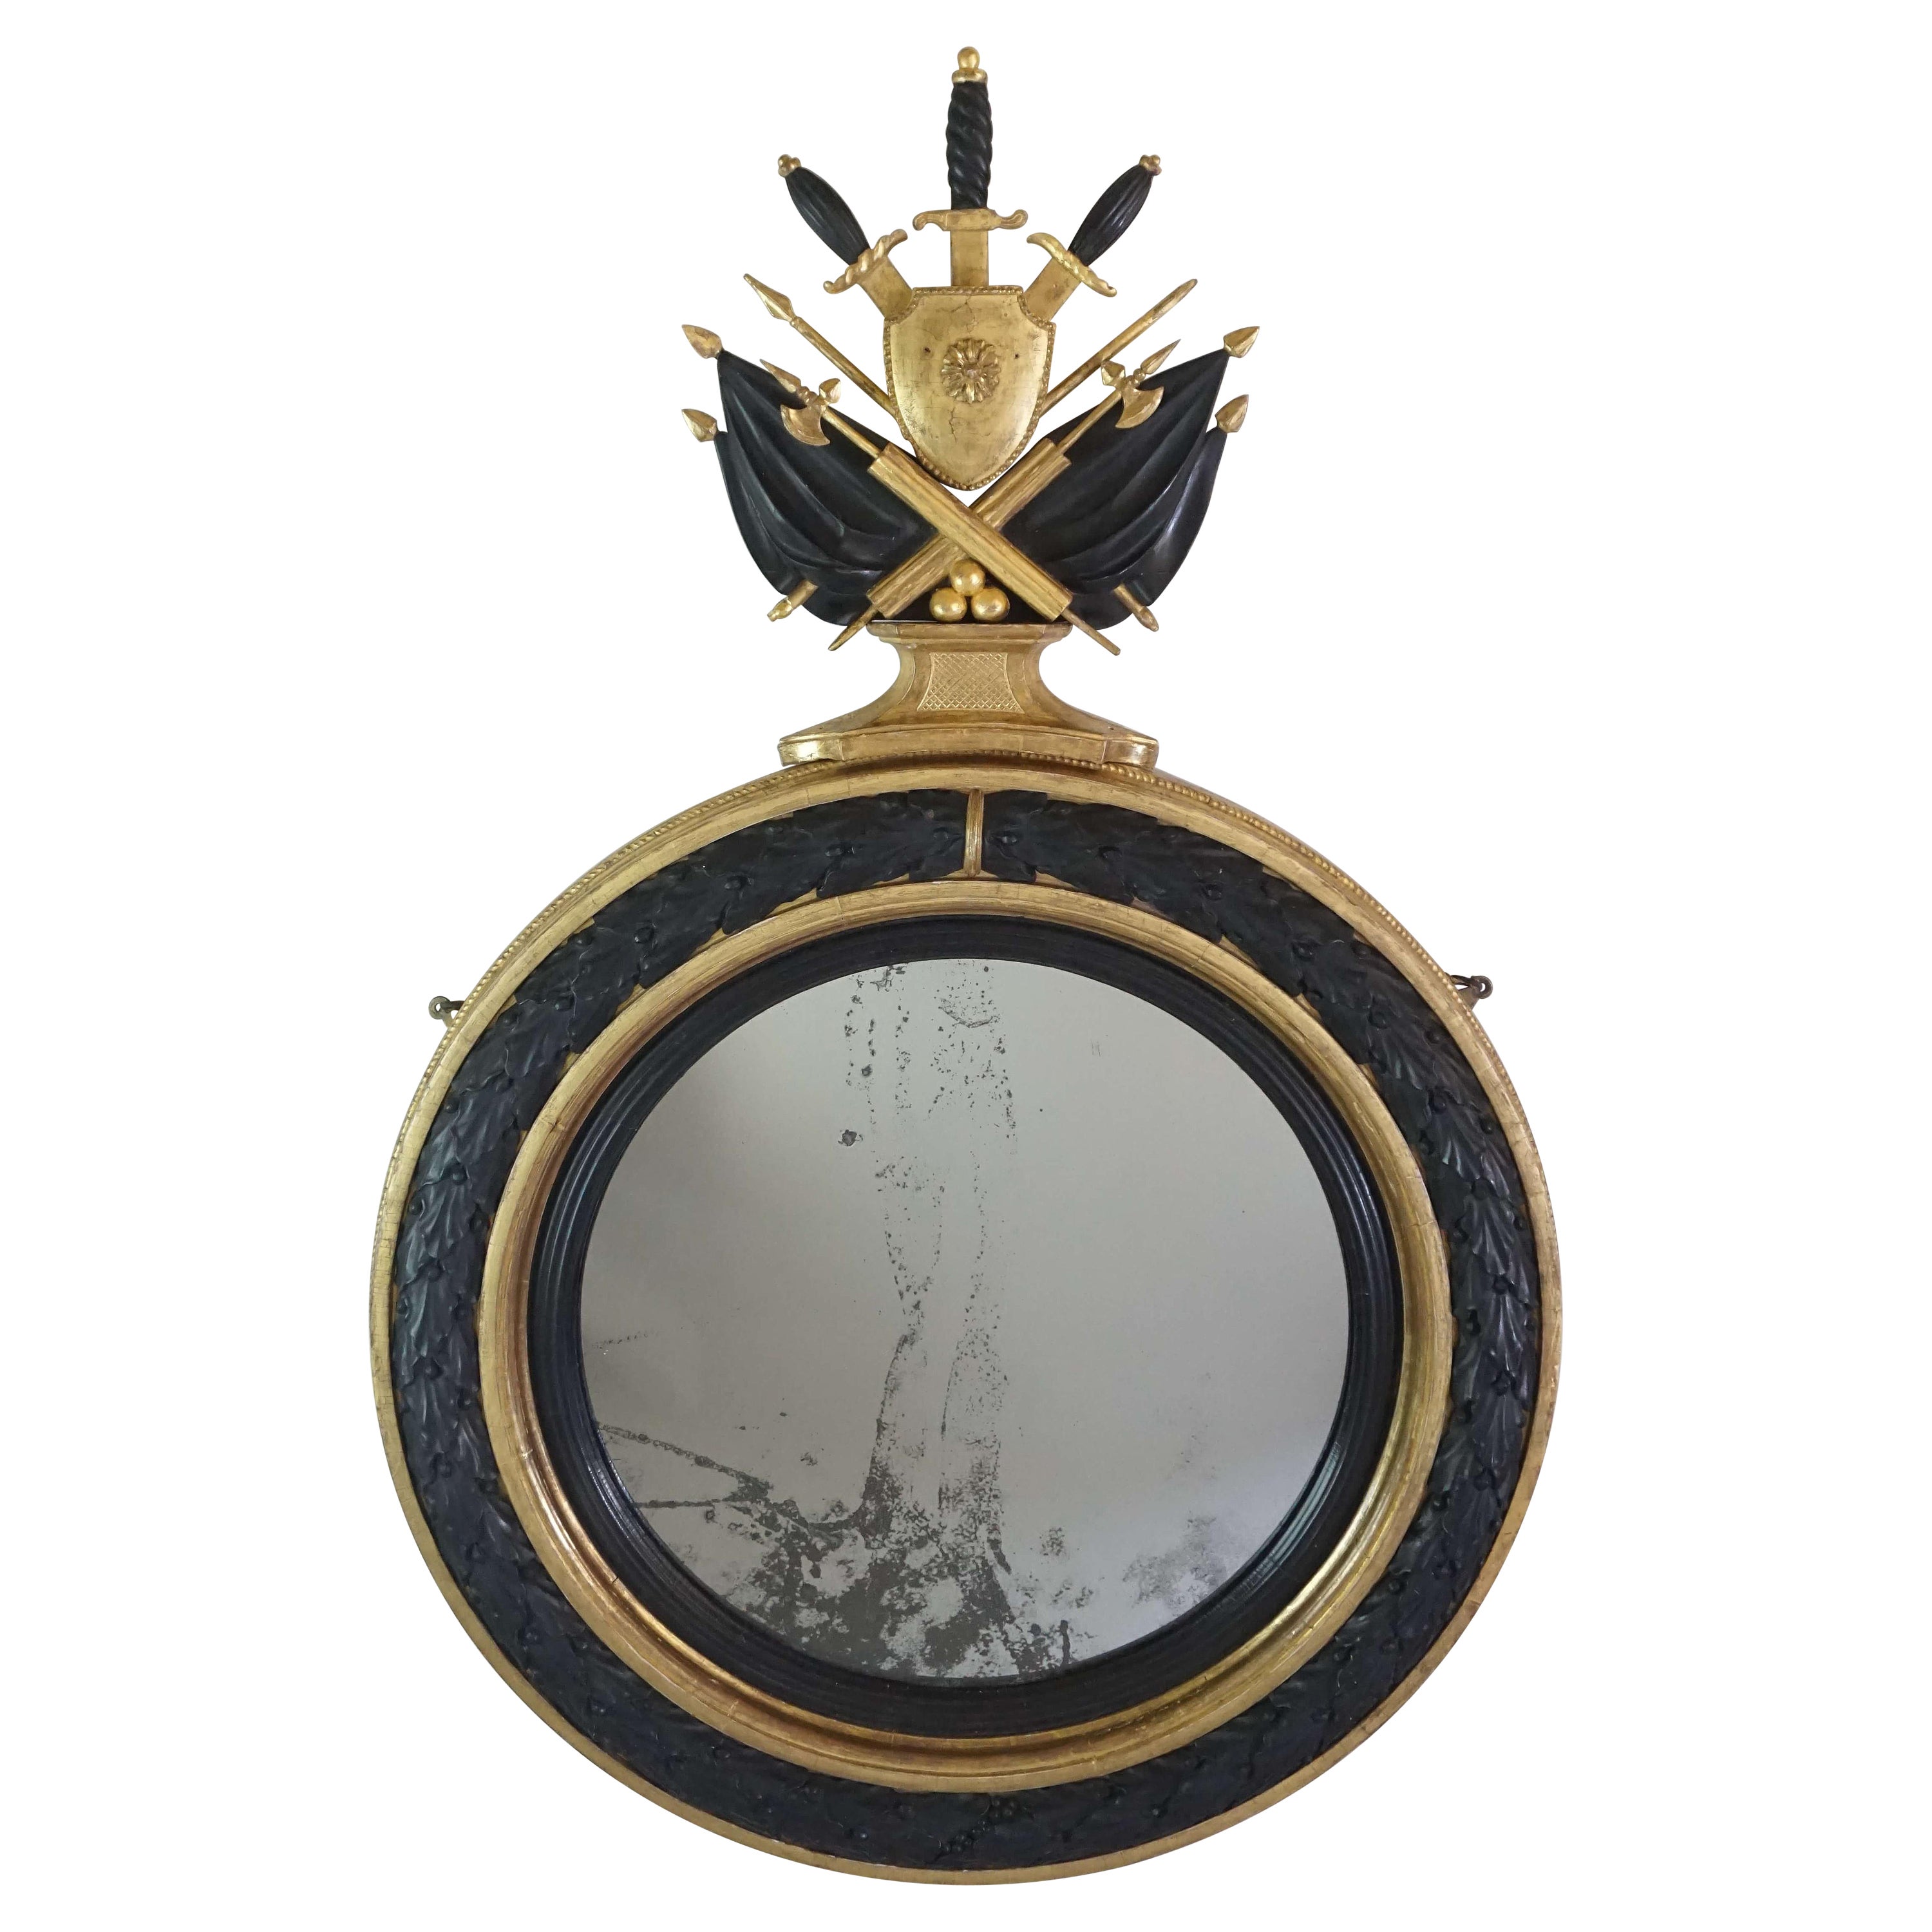 Neoclassical Regency Giltwood and Ebonized Convex Mirror, Signed and Dated 1813